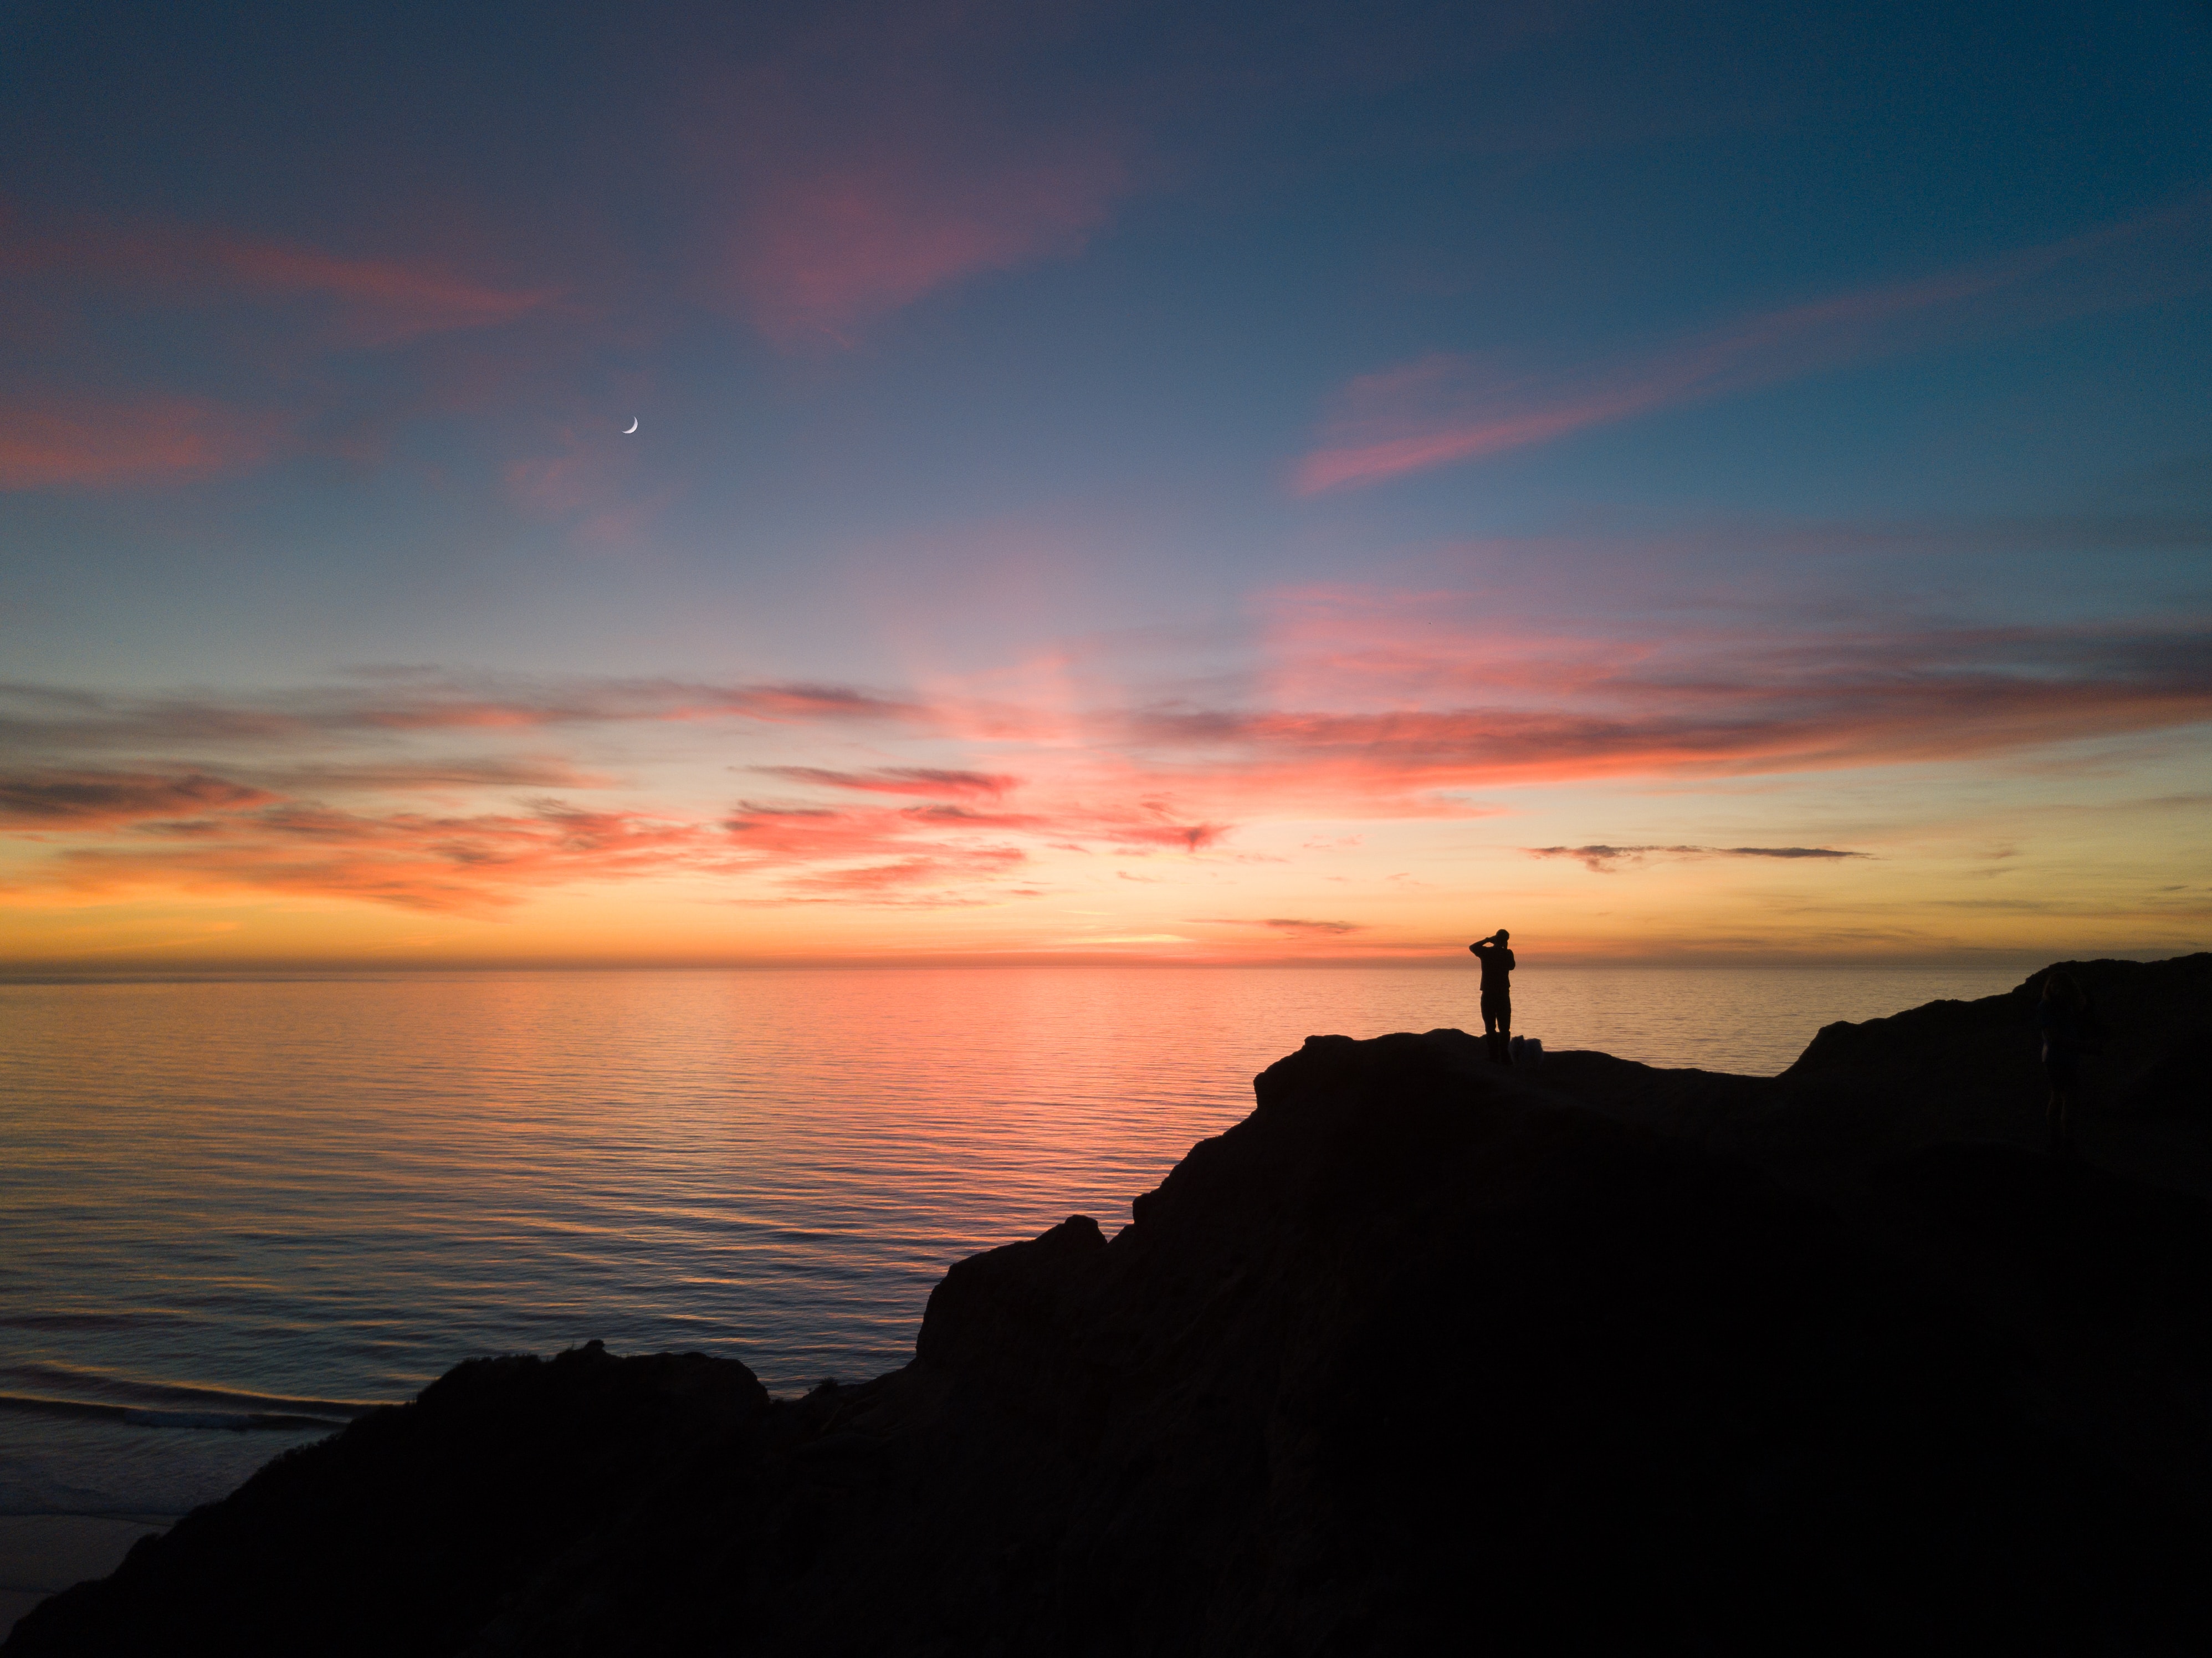 A man stands on a cliff at sunset